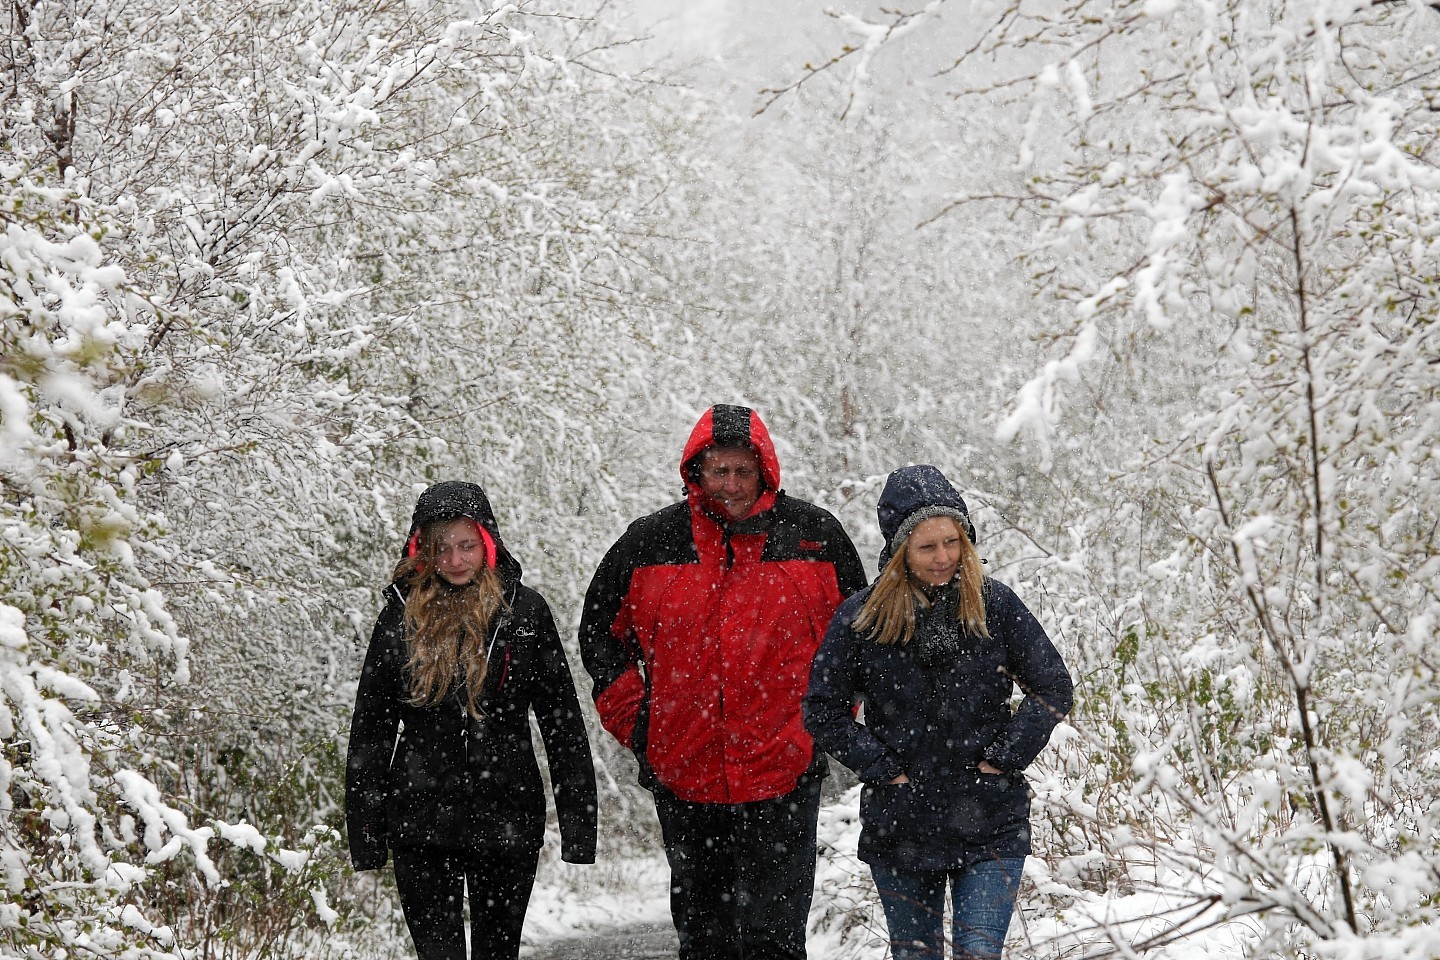 A family braves the snow to take a walk in the Highlands yesterday